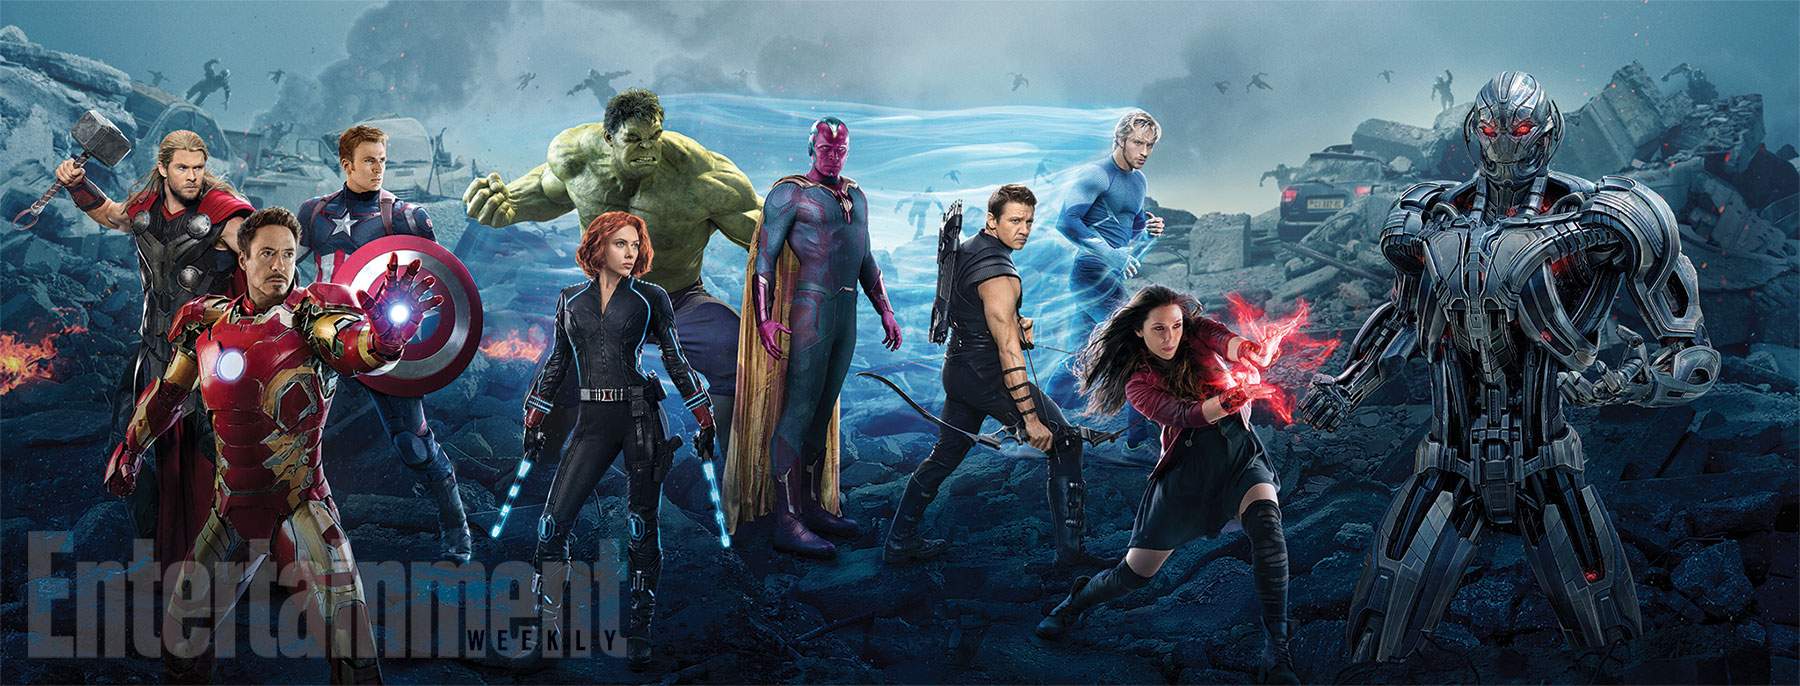 Avengers: Age Of Ultron Magazine Cover For Entertainment Weekly & Total Film Terungkap